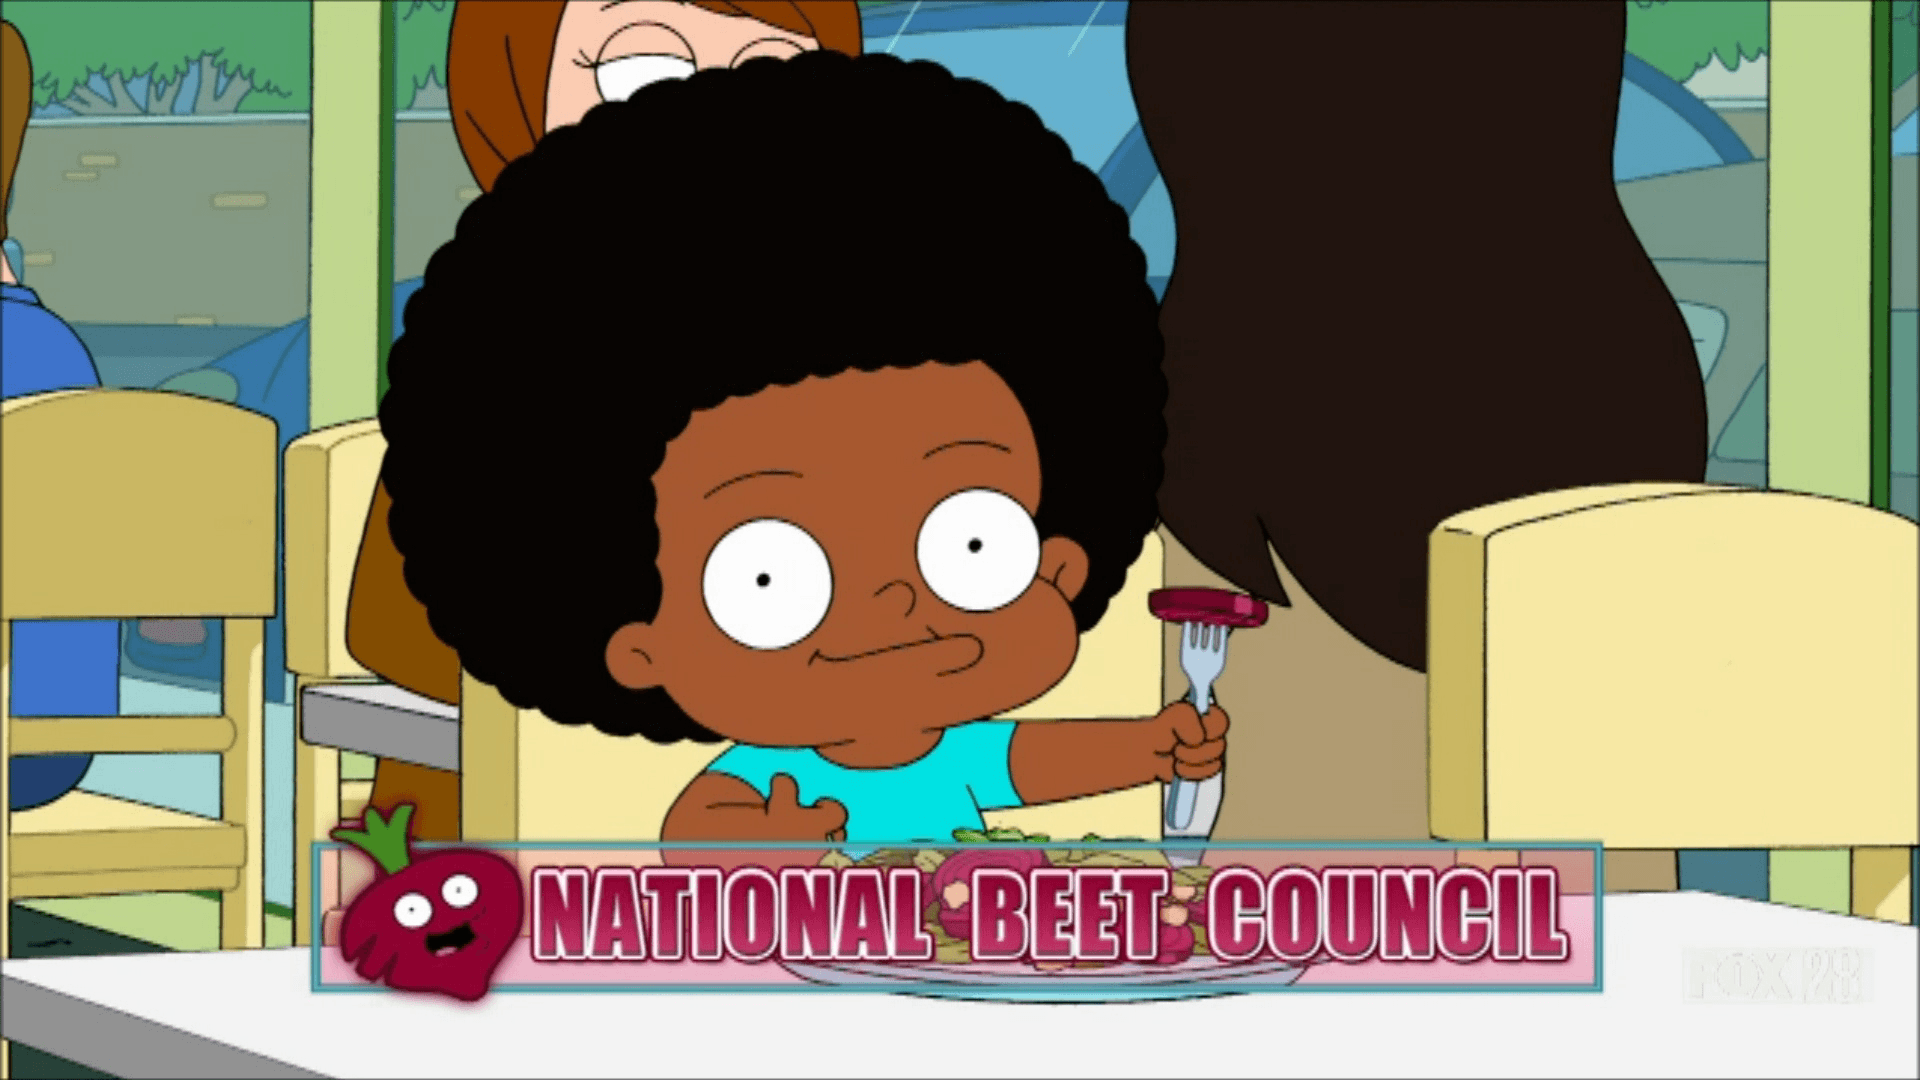 Beets. The Cleveland Show